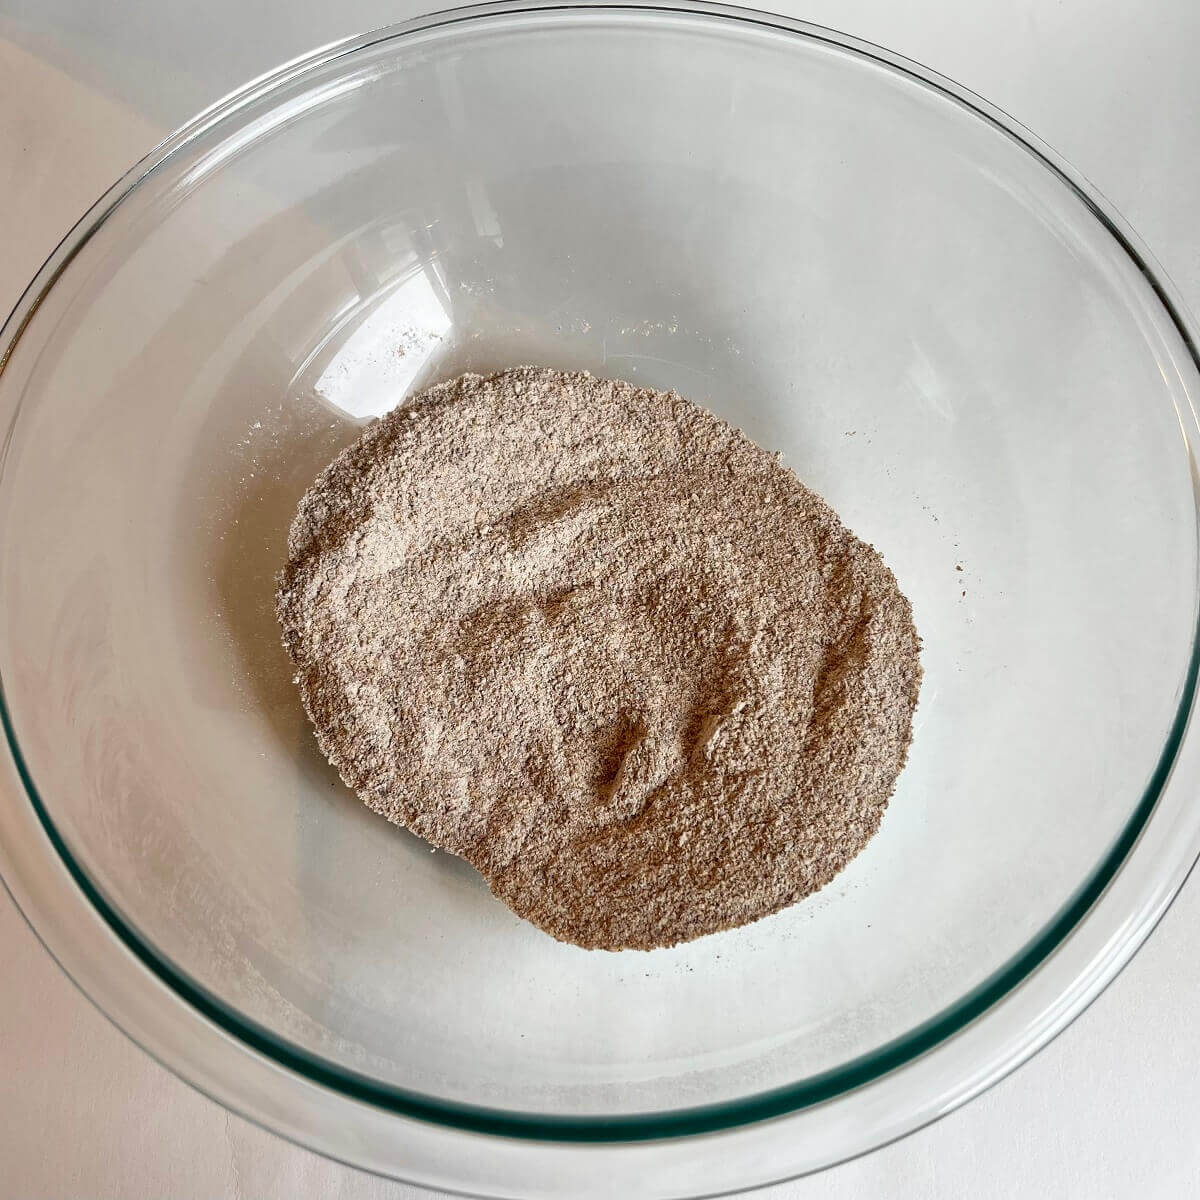 Ground flax, flour, and baking powder in a glass mixing bowl.